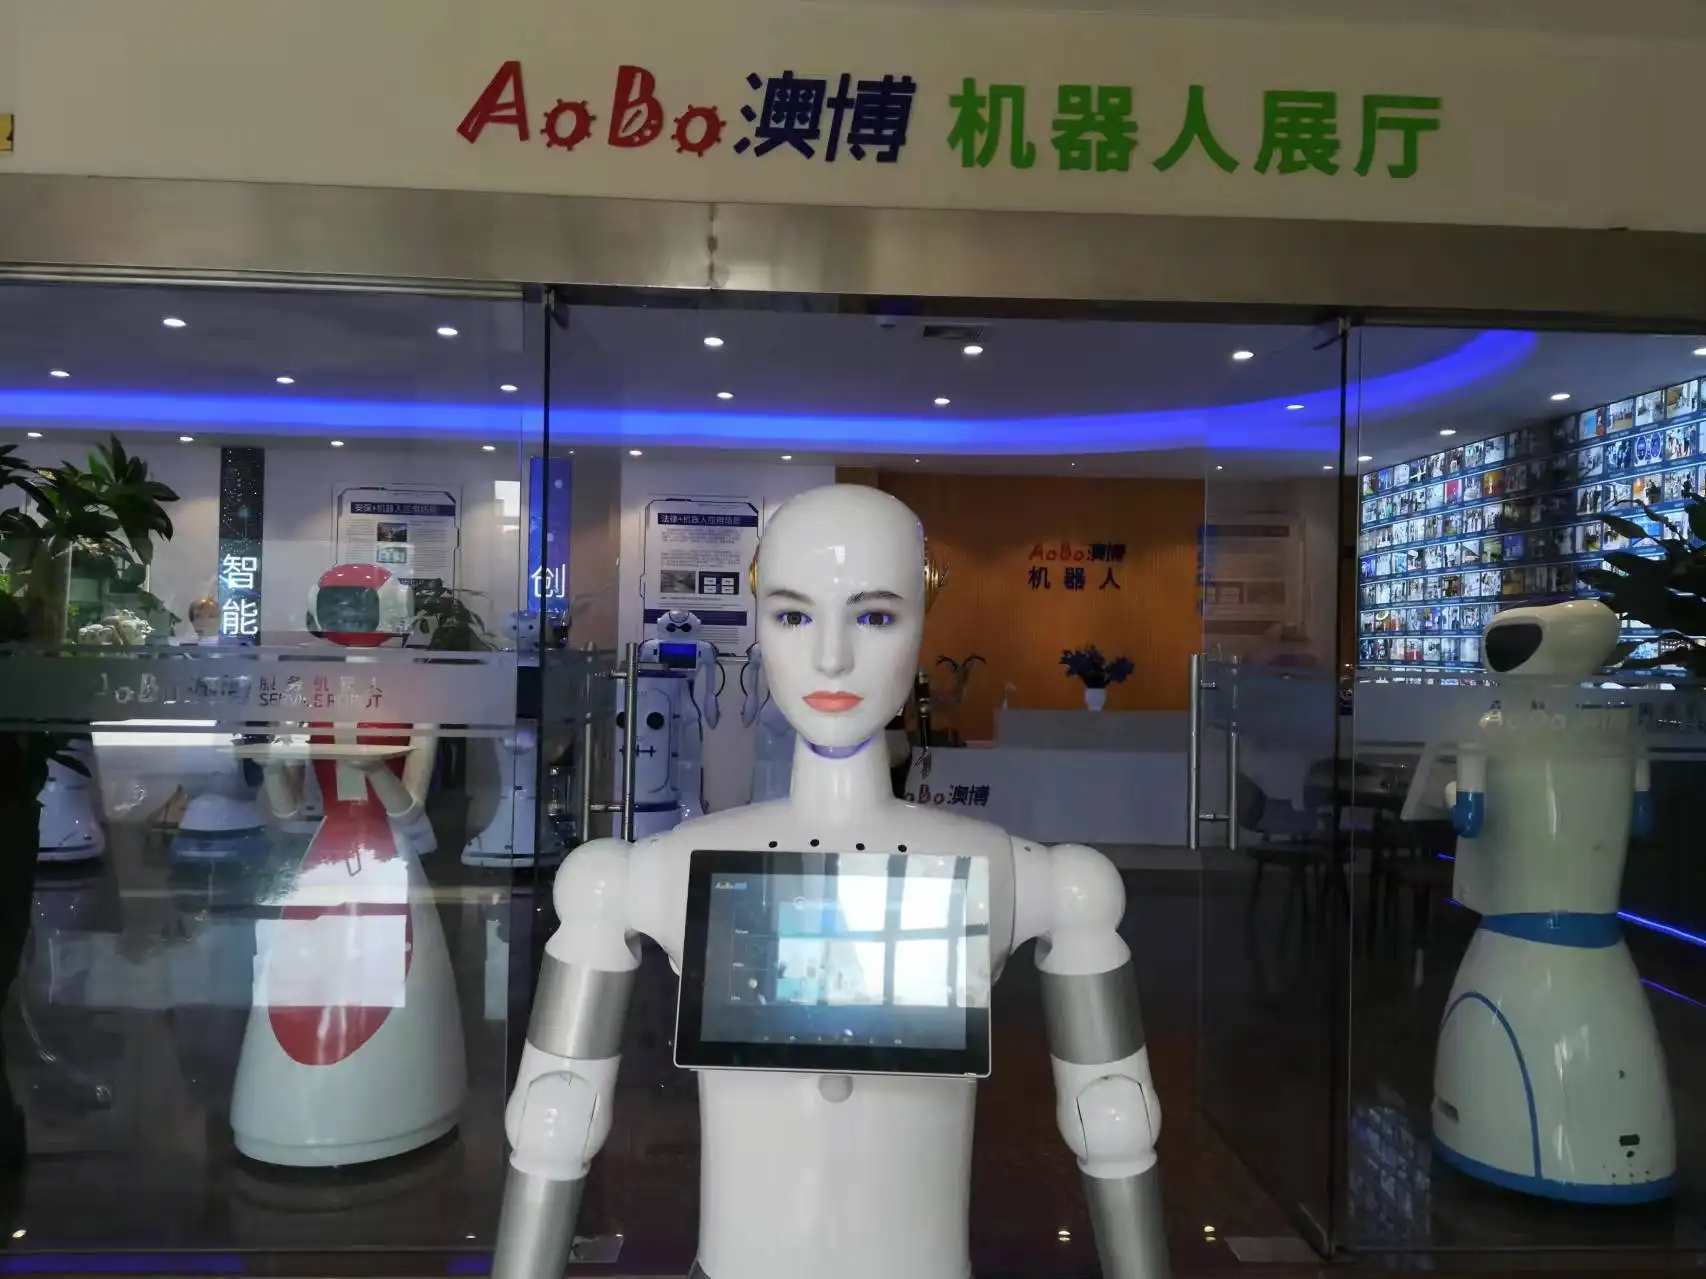 humanoid female robots can be used in university  shopping mall  school  exhibition hall  museum.